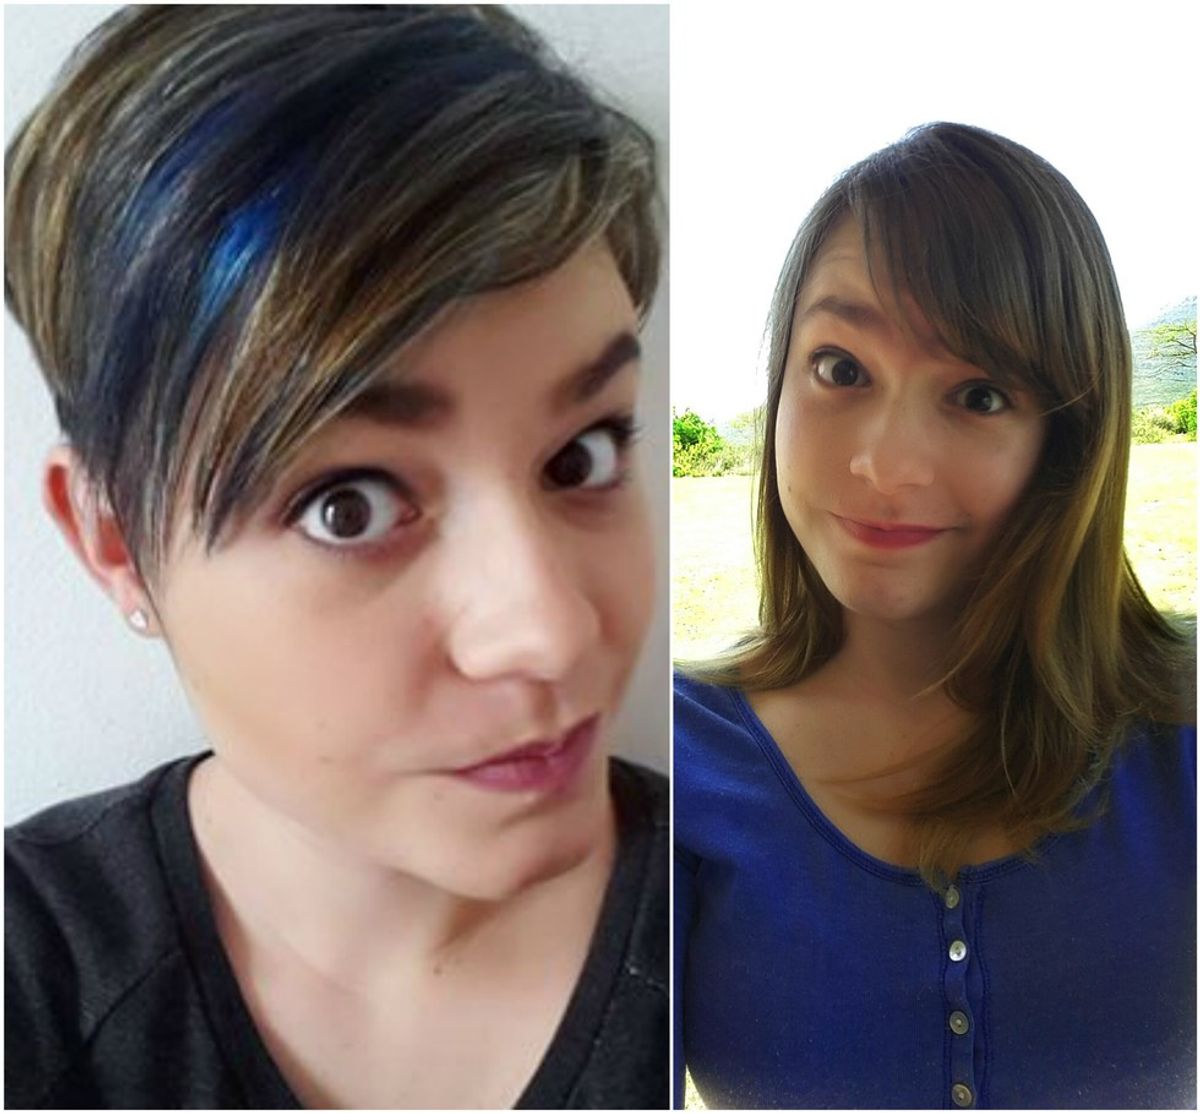 How To: Grow Out A Pixie